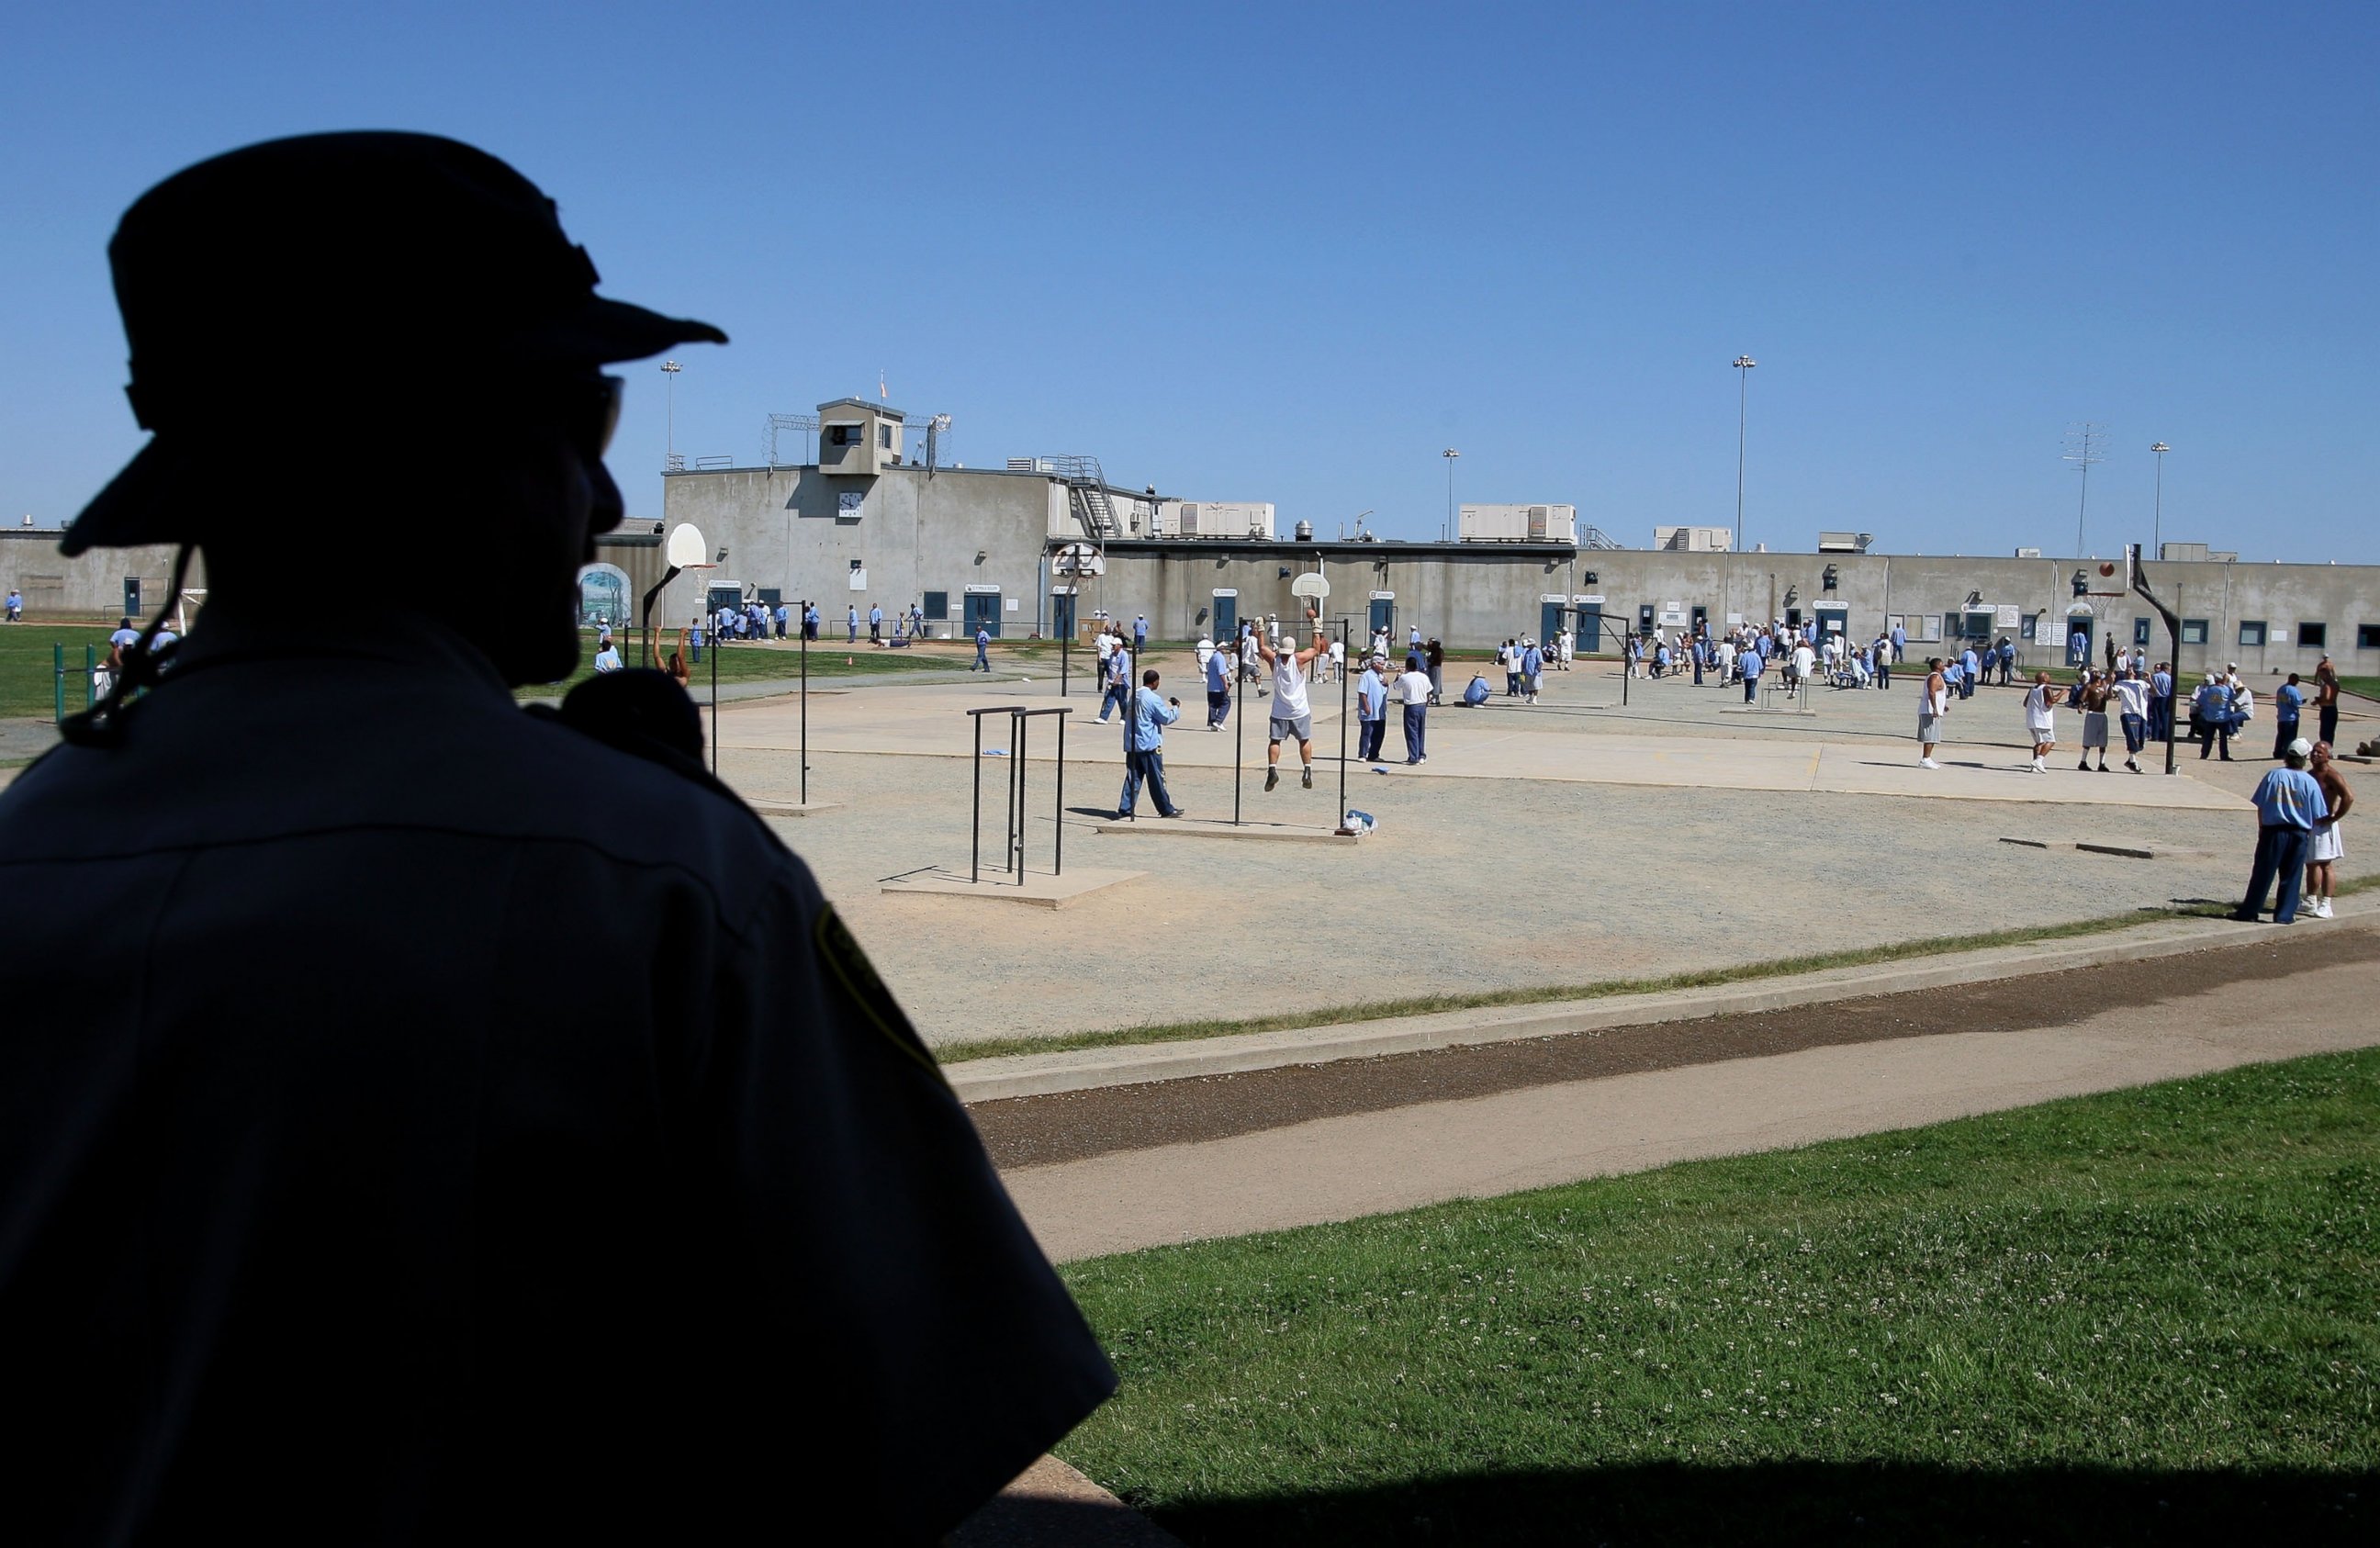 PHOTO: A California Department of Corrections officer looks on as inmates at the Mule Creek State Prison exercise in the yard August 28, 2007 in Ione, California